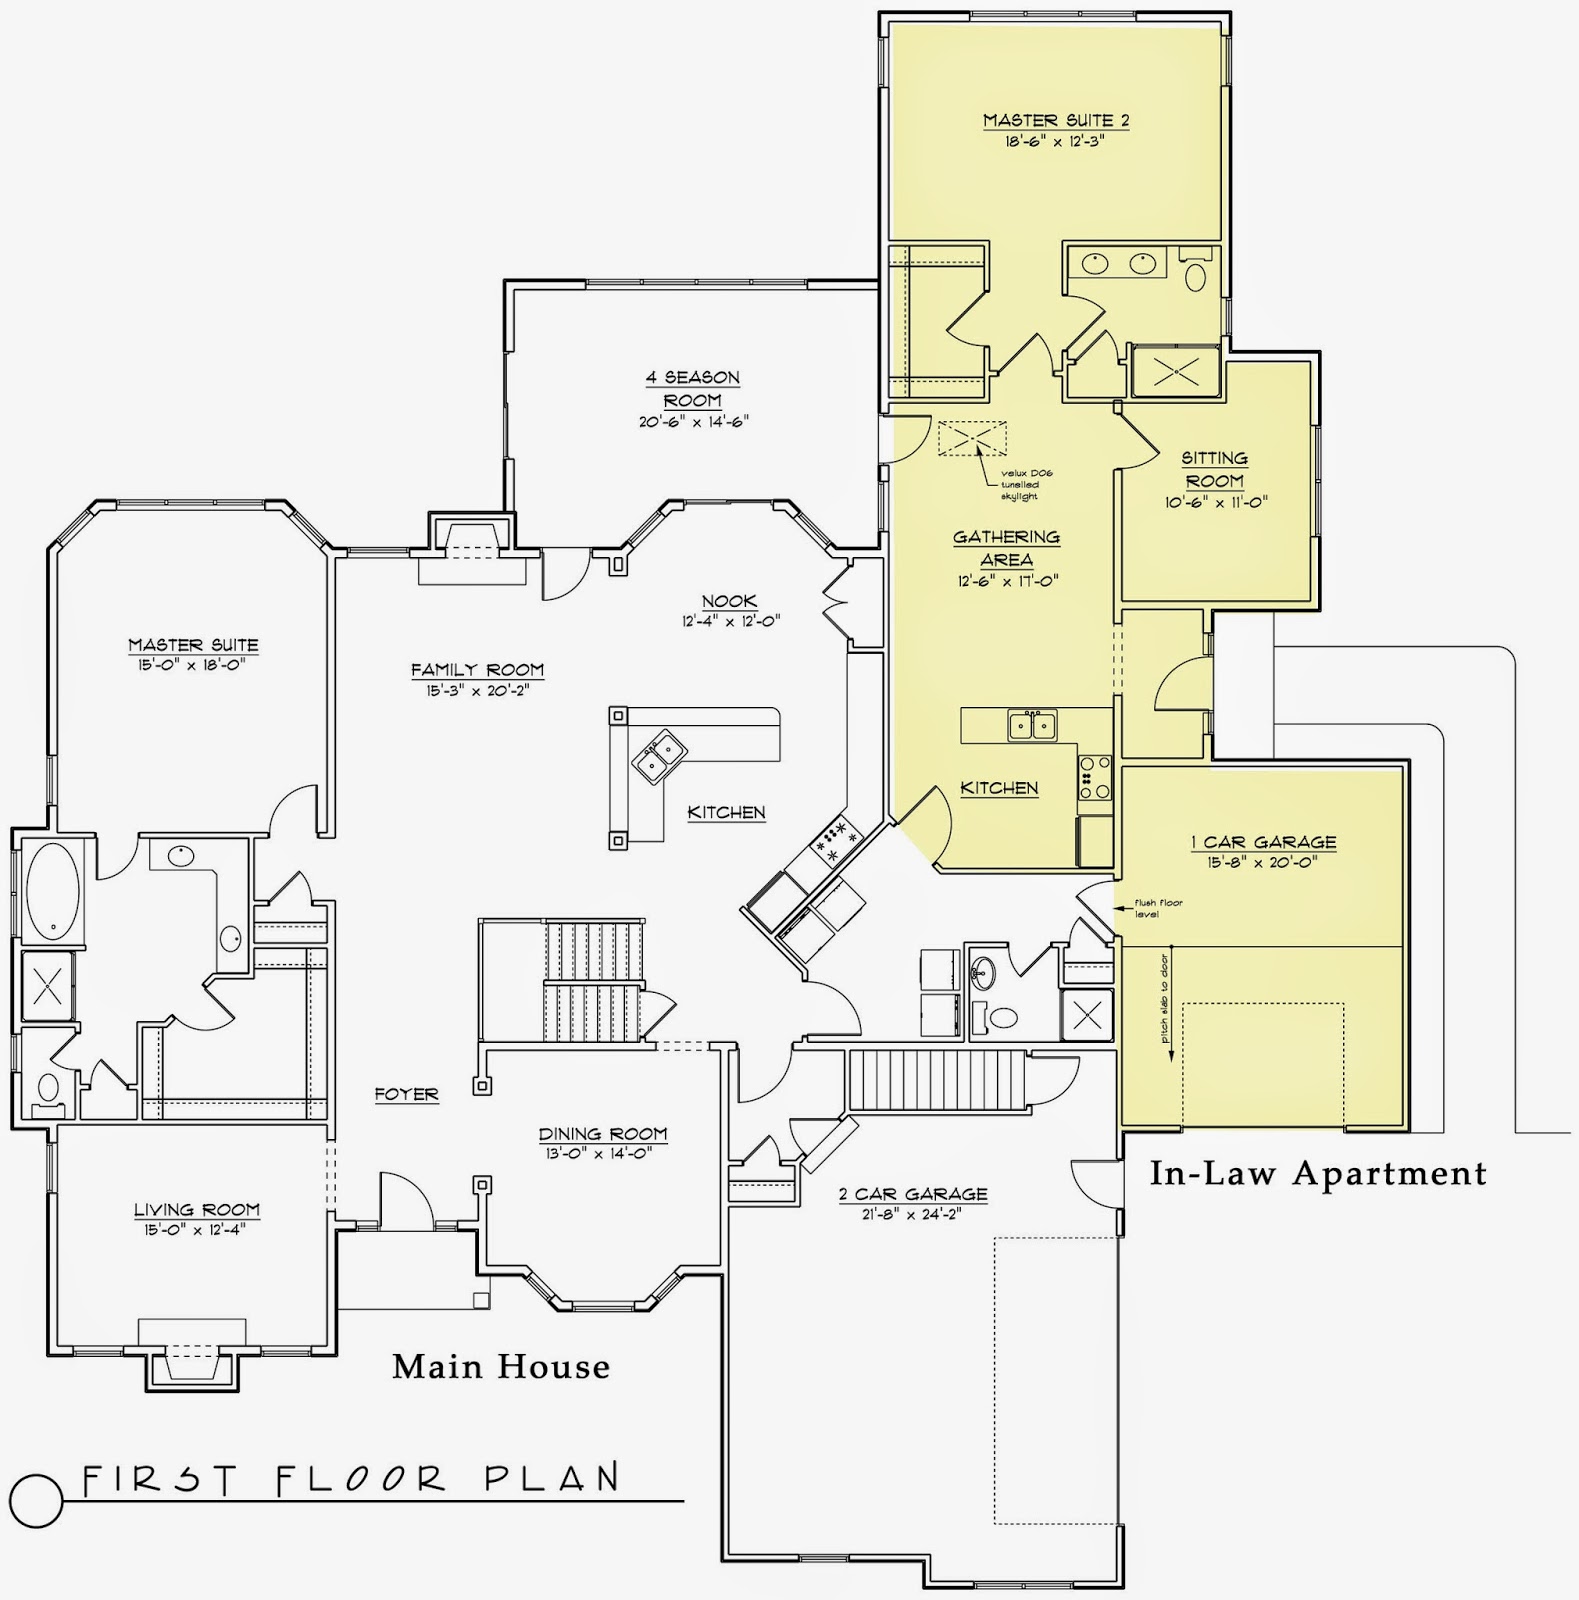 16 Perfect Images House  Plans  With Mother  in law  Apartment 